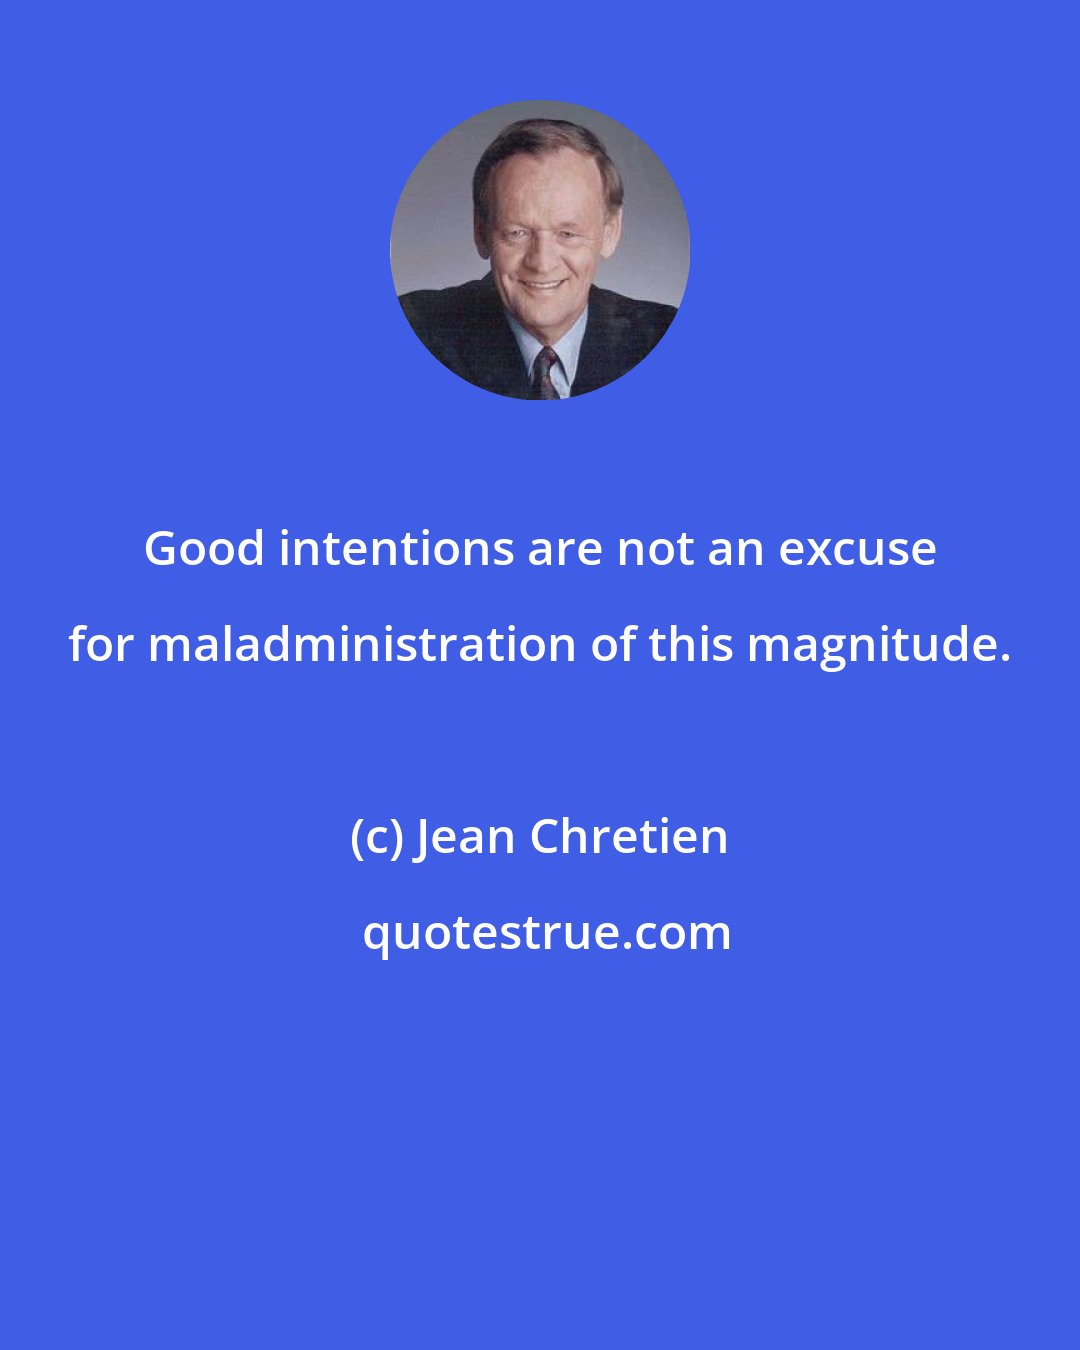 Jean Chretien: Good intentions are not an excuse for maladministration of this magnitude.